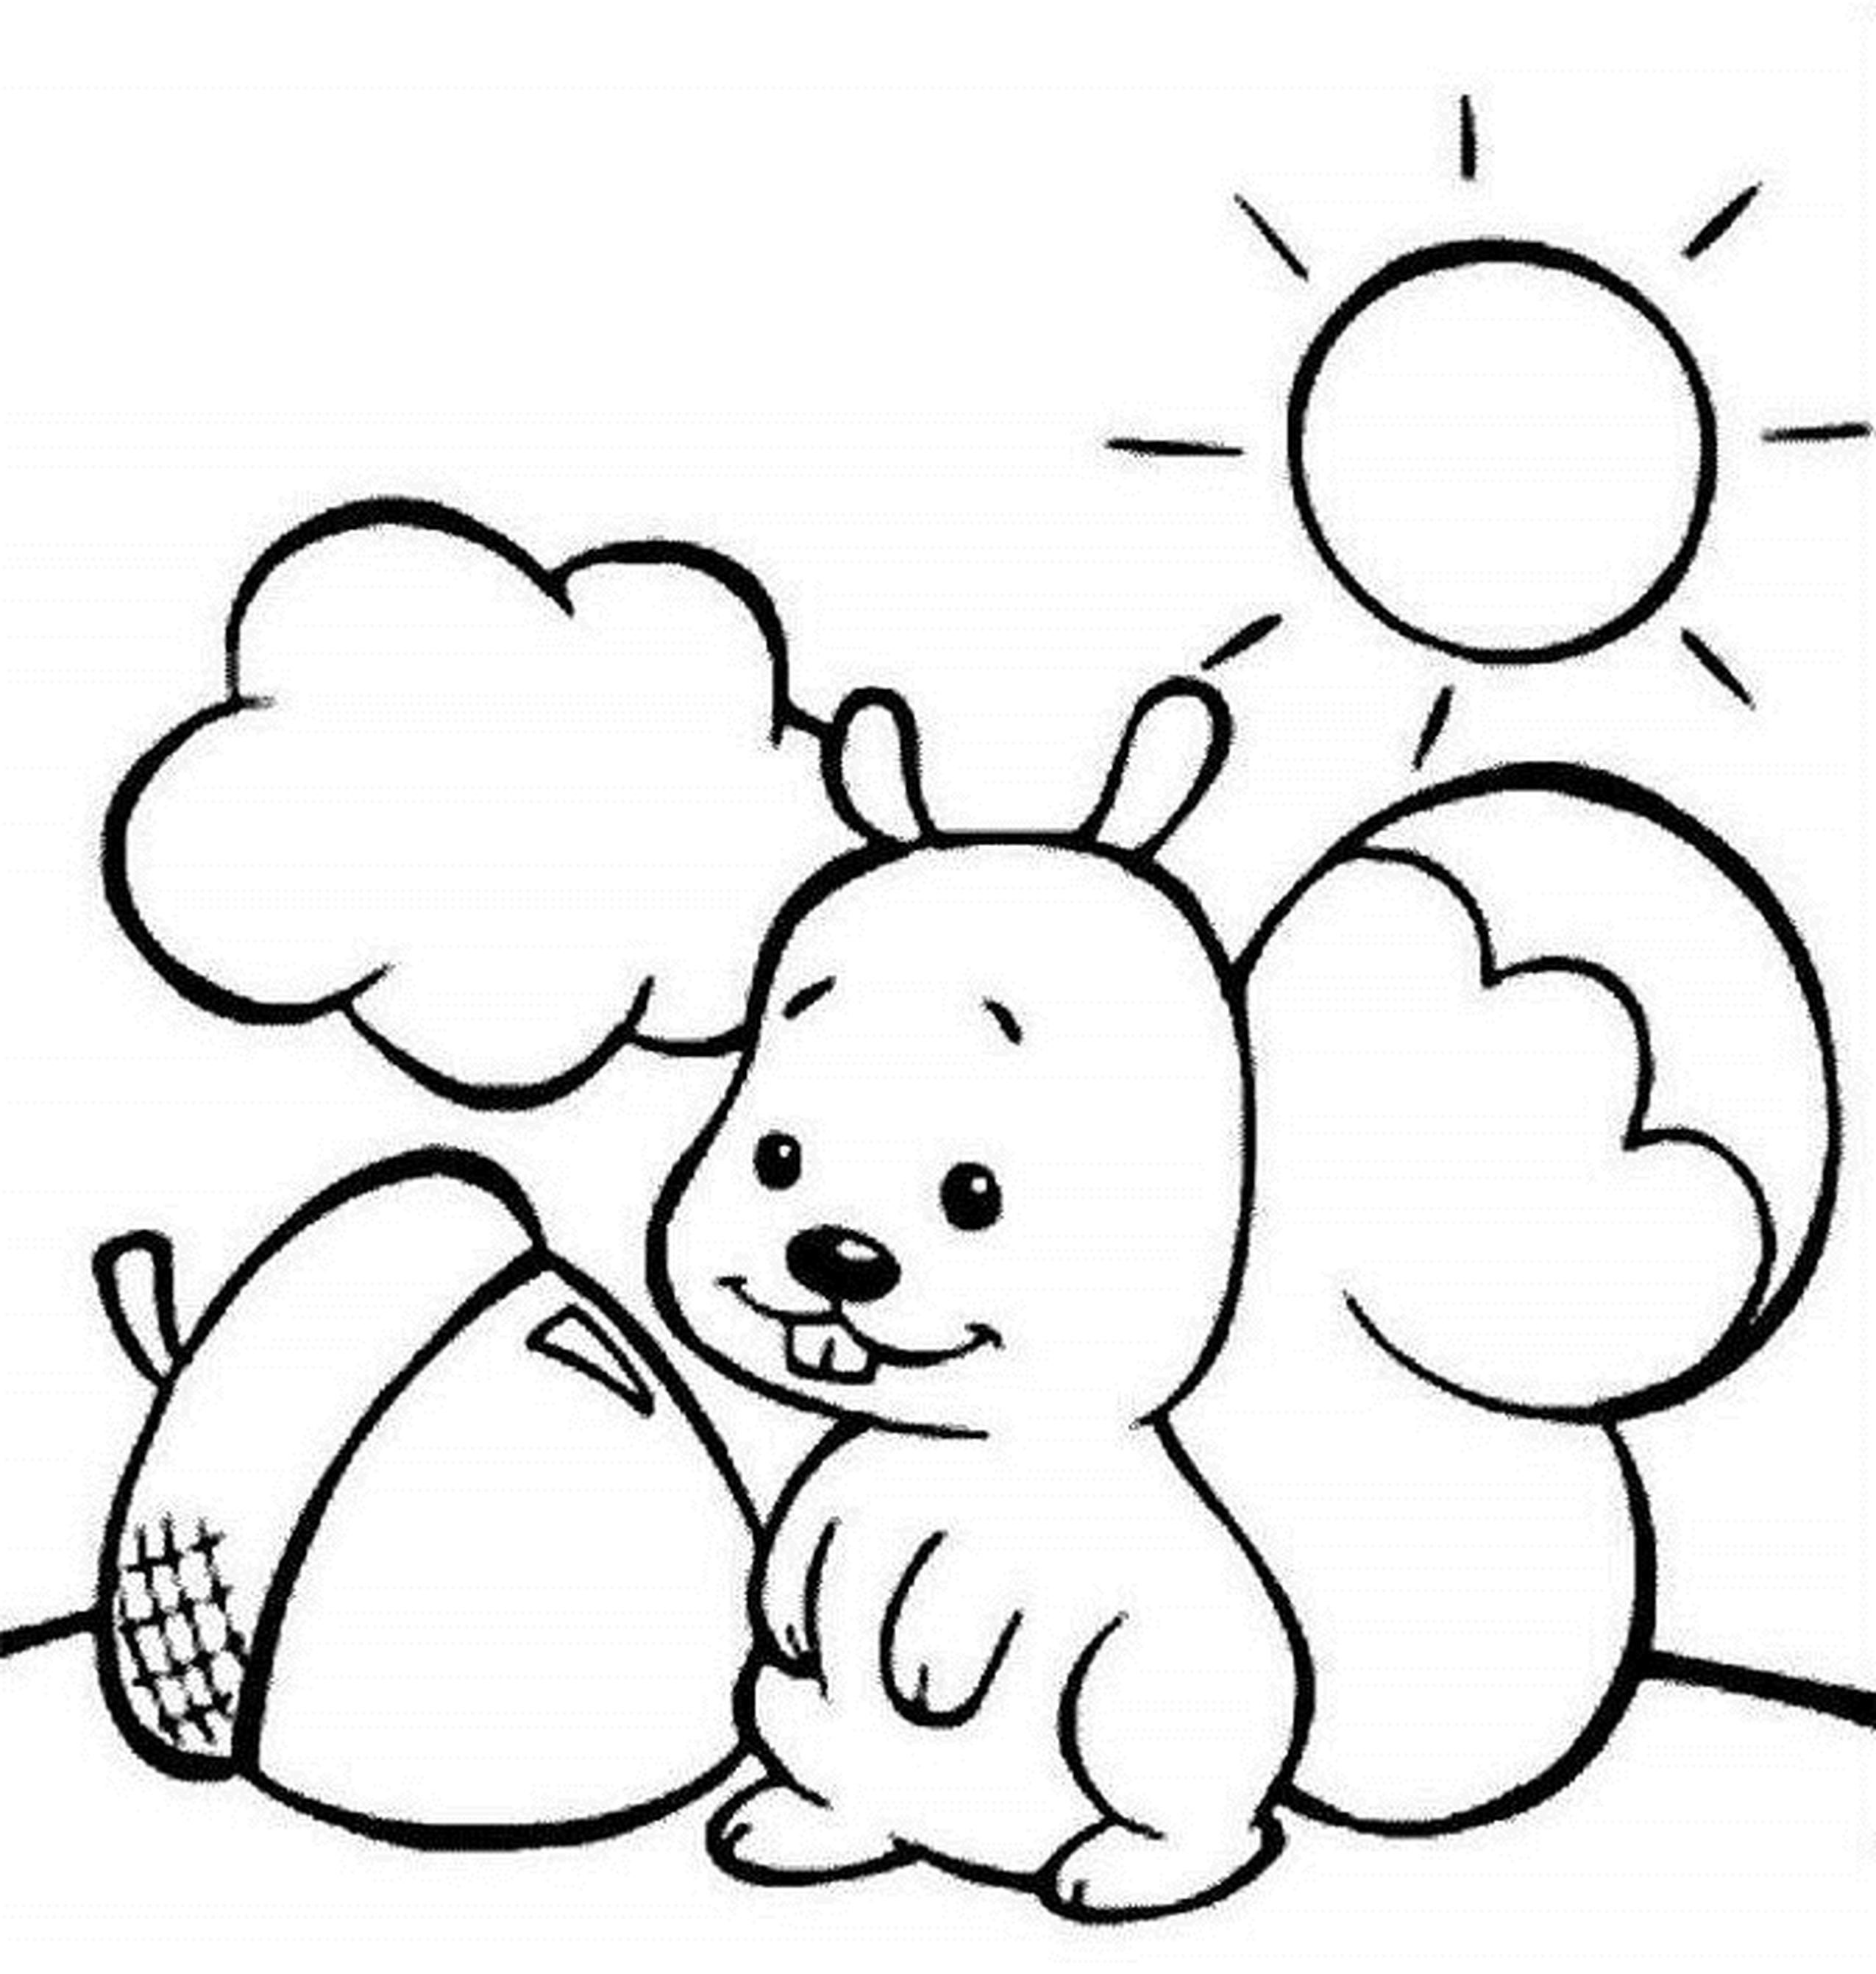 Coloring Pages: Free Printable Fruit Coloring Pages For Kids, Cute ...